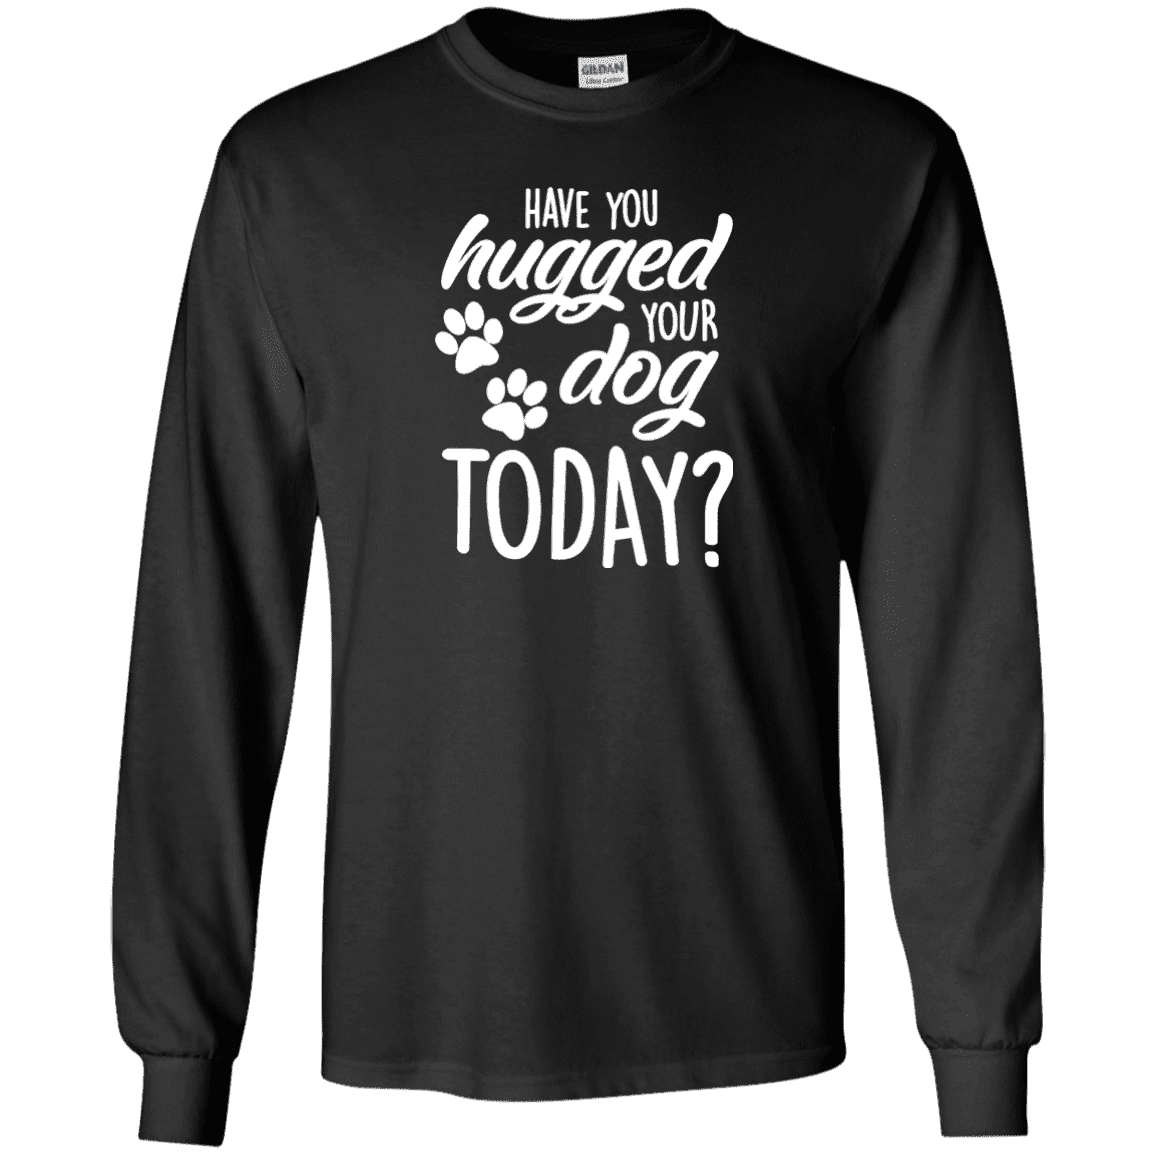 Have You Hugged Your Dog Today? - Long Sleeve T Shirt.